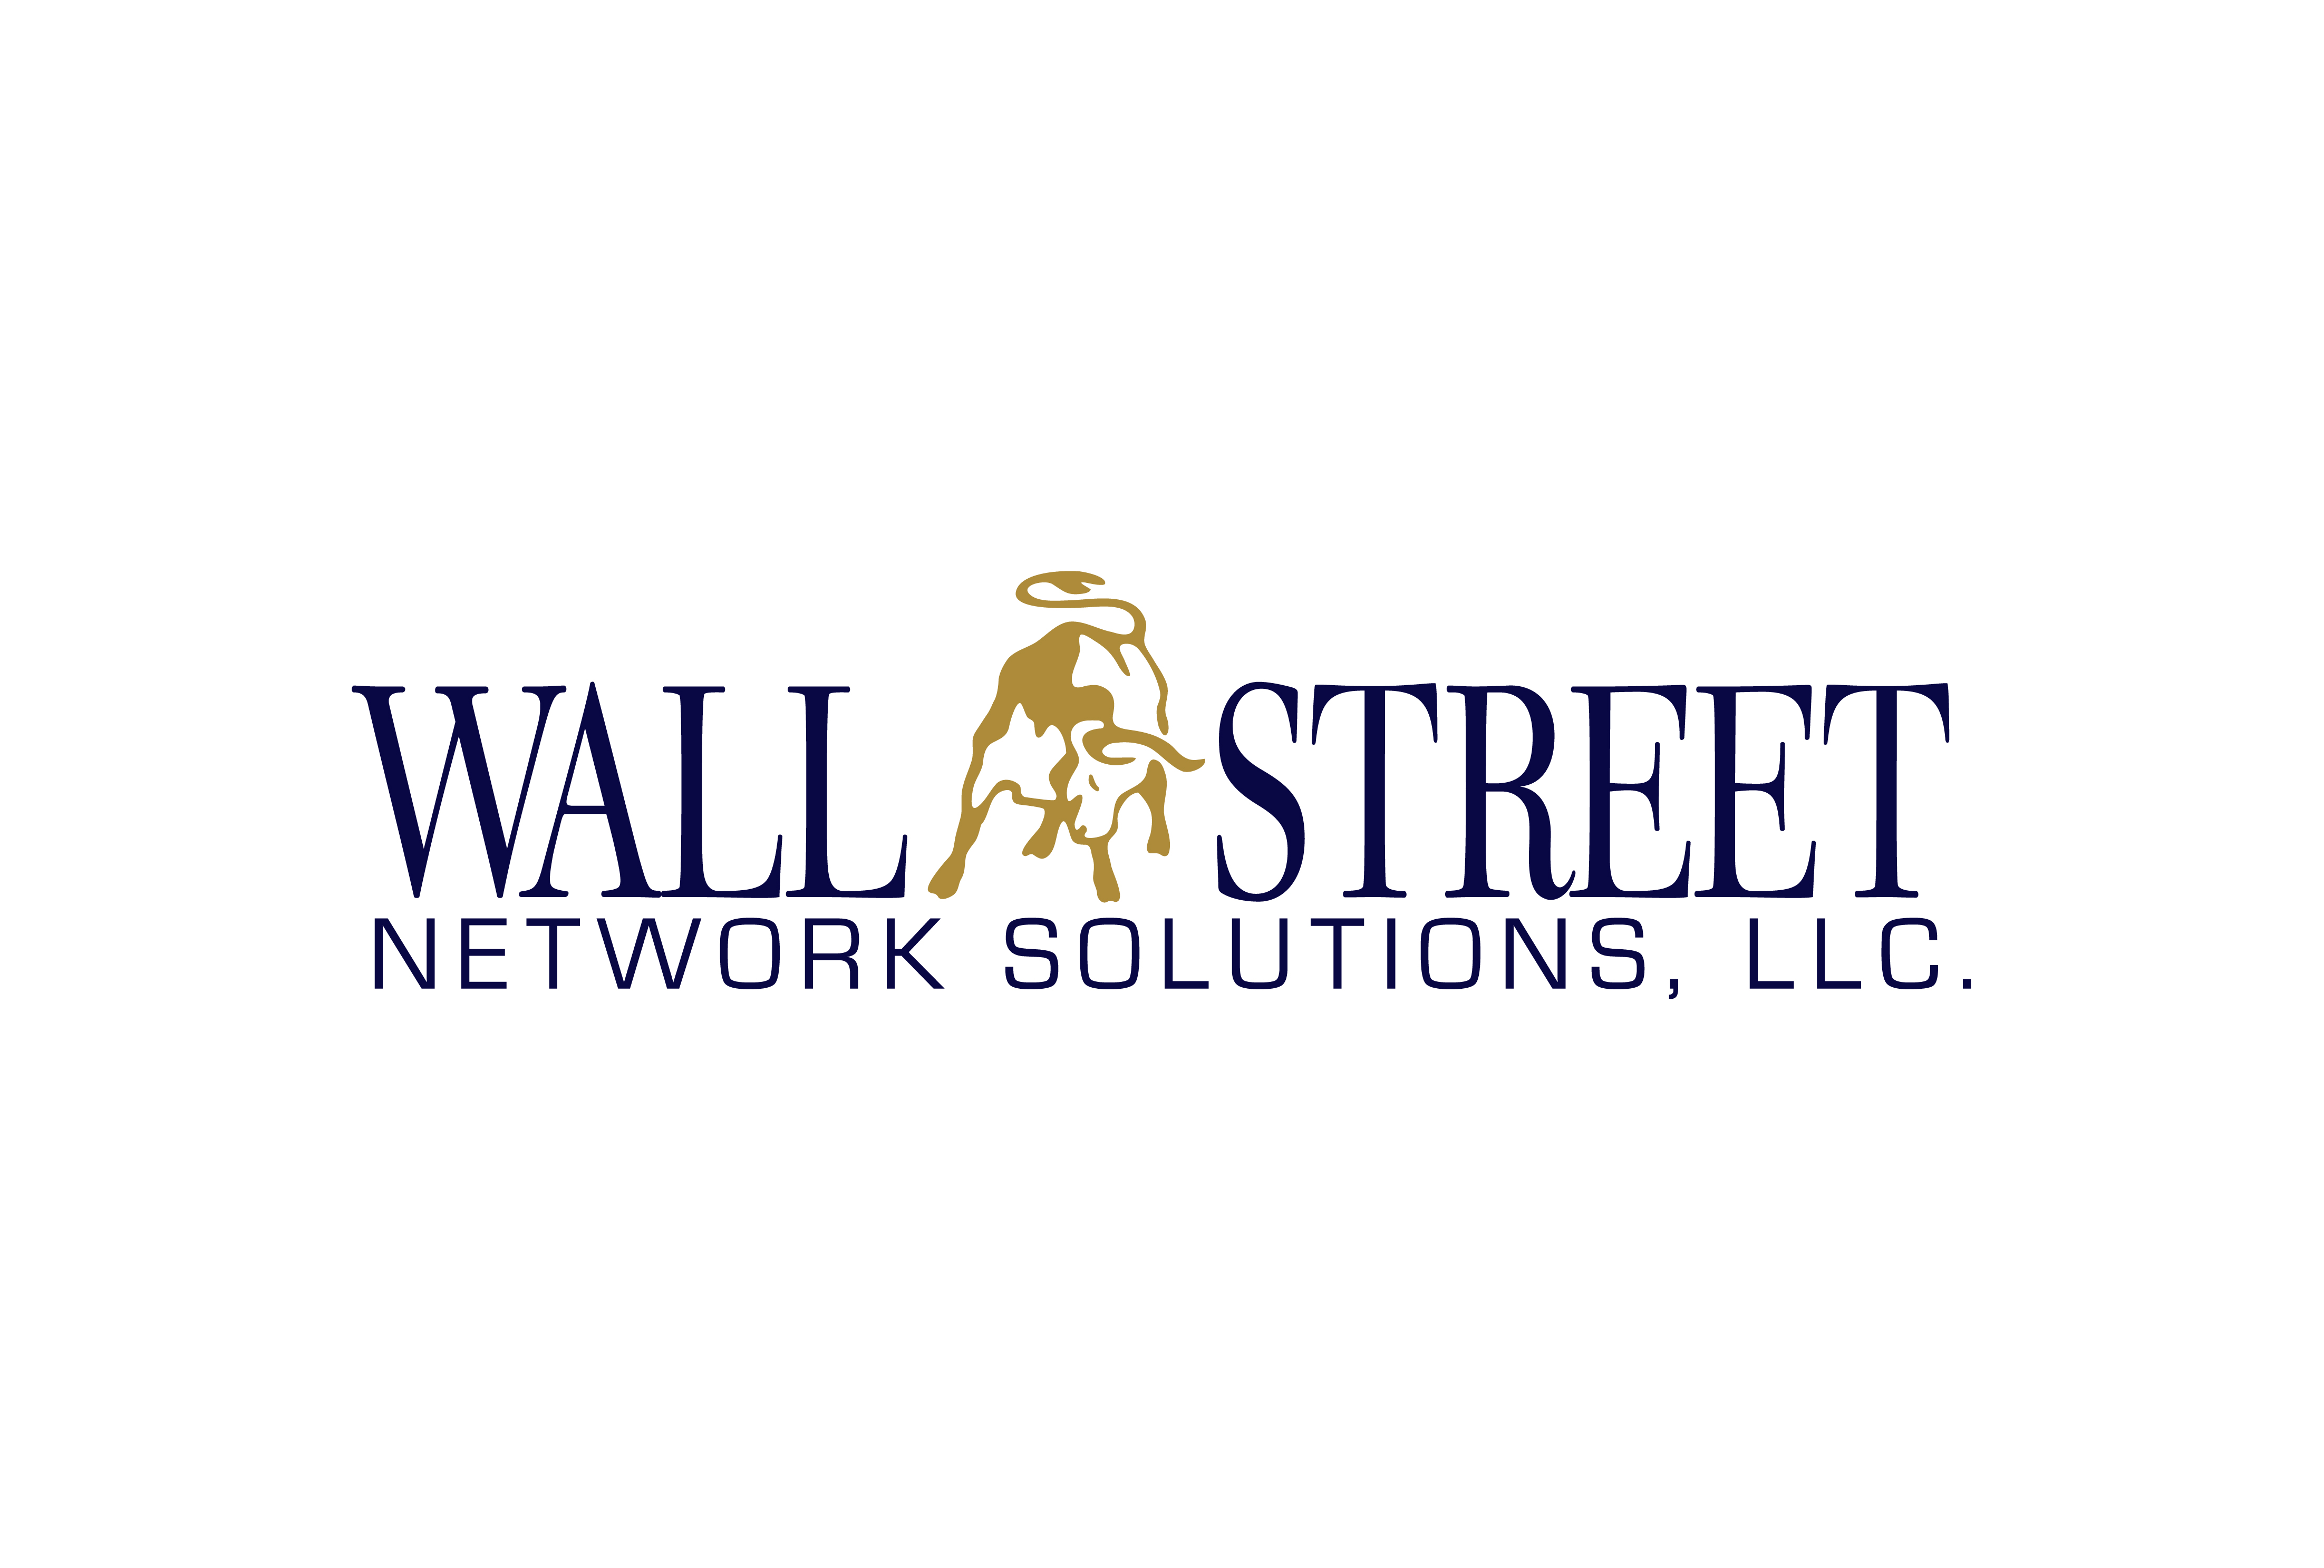 Wall Street Network Solutions